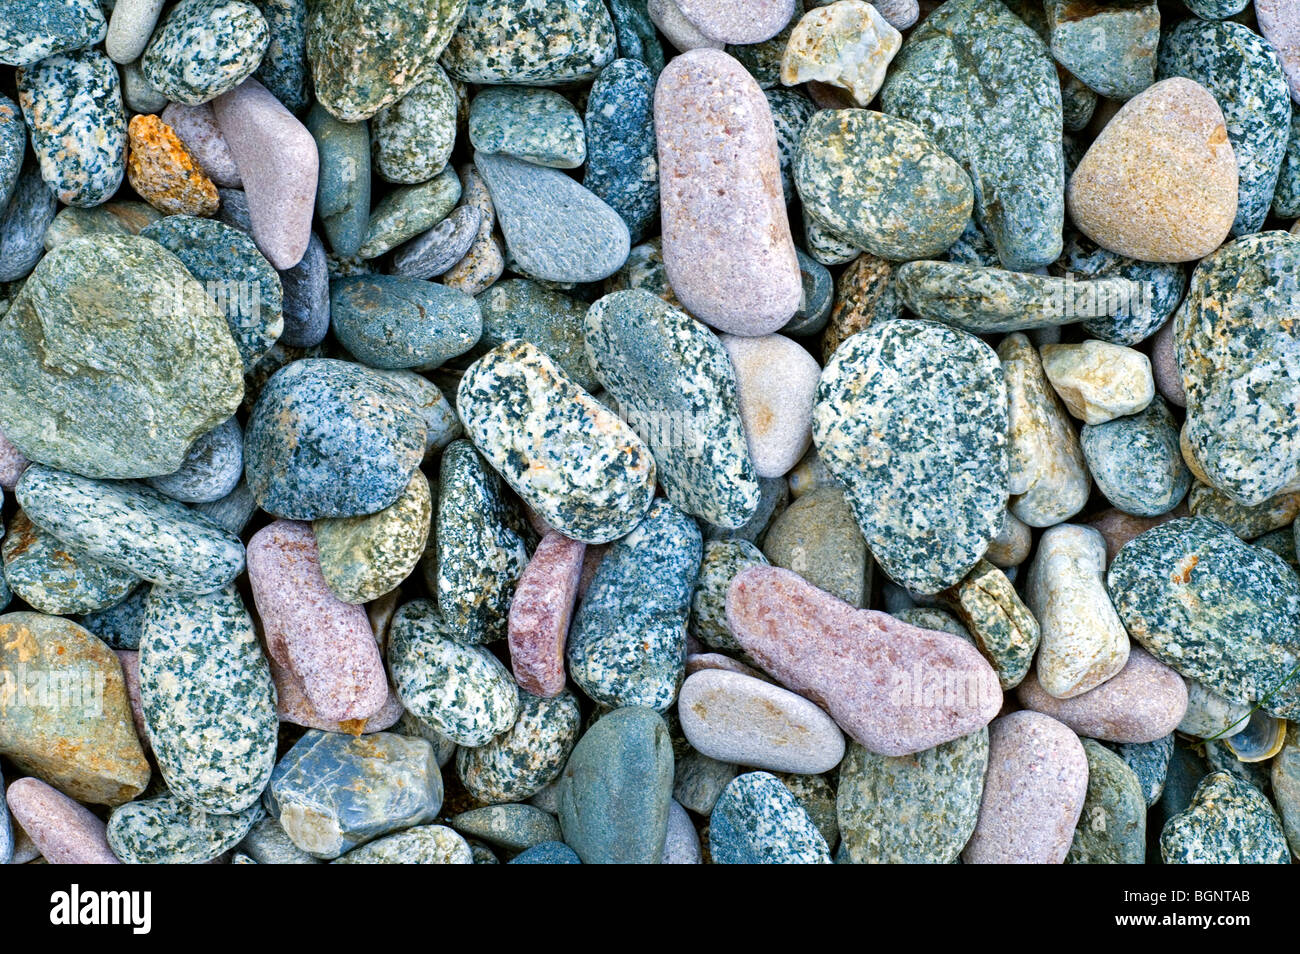 Colourful water smoothed pebbles at shingle beach Stock Photo